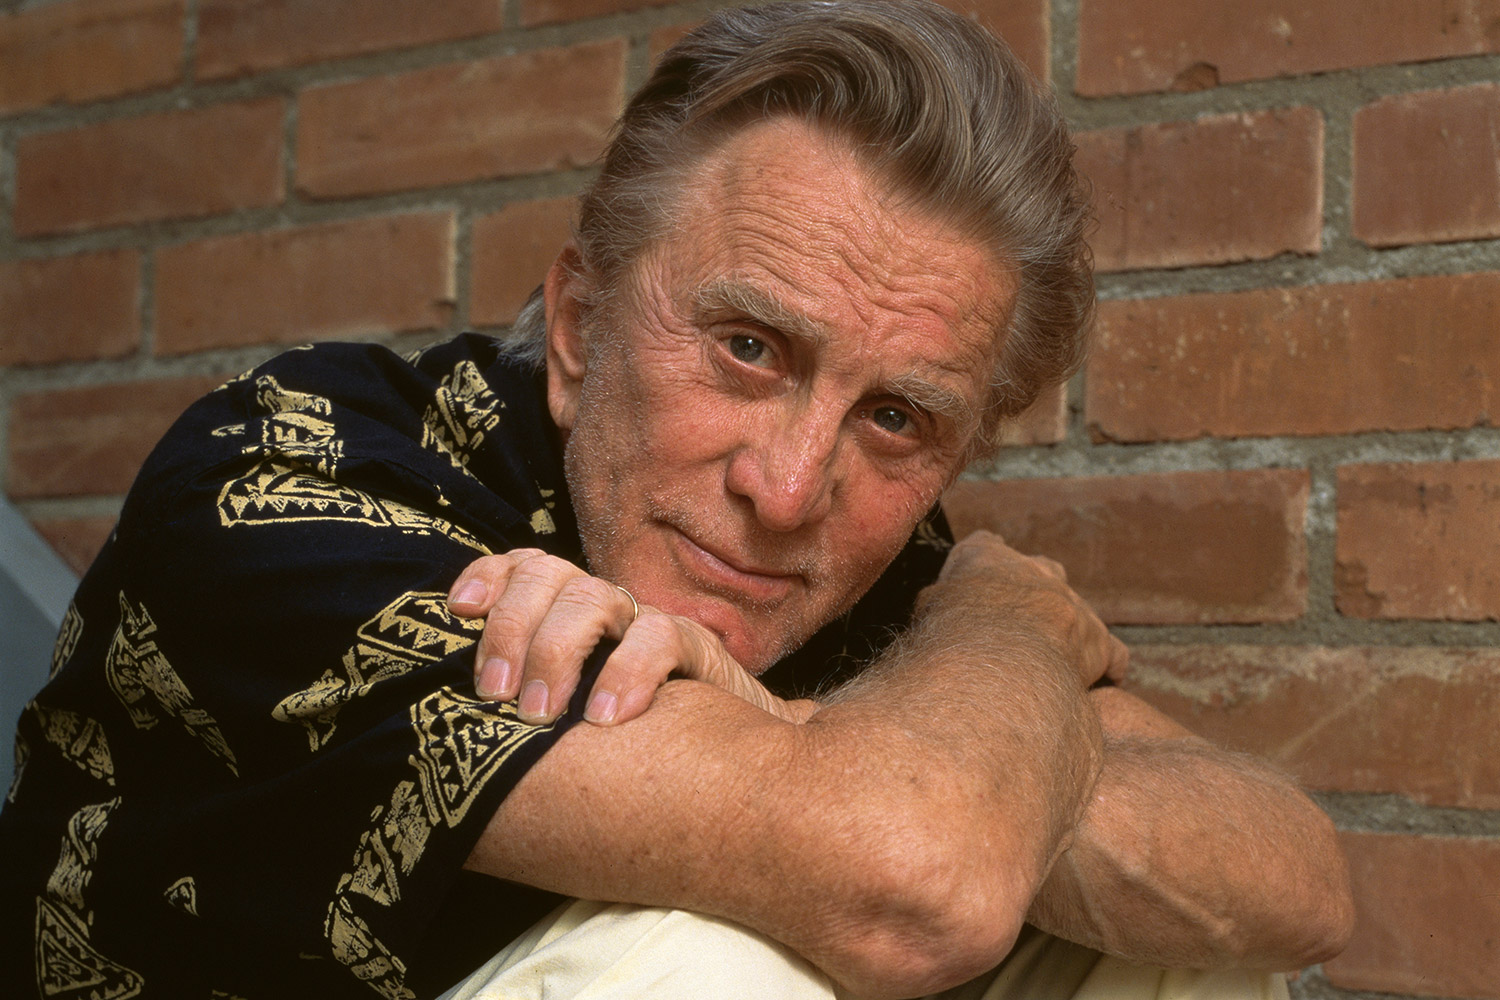 celebrities who committed crimes - Kirk Douglas (probably) raped a 14-year-old Natalie Wood.